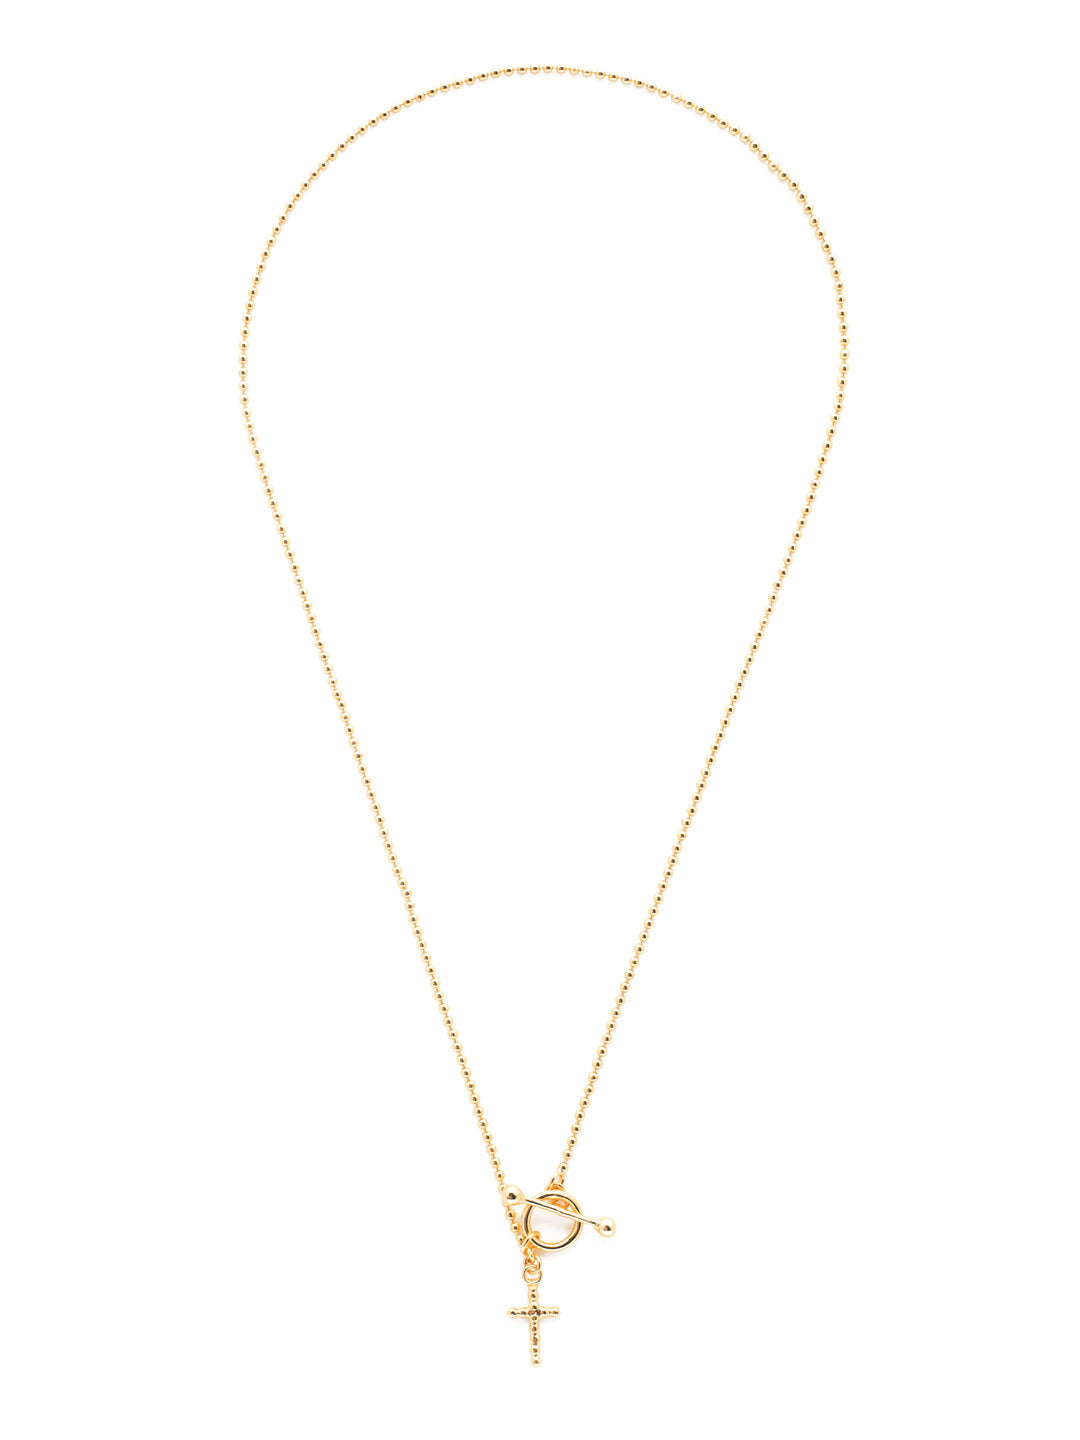 Mary Mini Pendant Necklace - NEV107BGCRY - The Mary Mini Pendant Necklace is a timeless classic; a beaded style chain lays base to a single metal tone mini cross, secured in the front with a stylish toggle clasp. From Sorrelli's Crystal collection in our Bright Gold-tone finish.